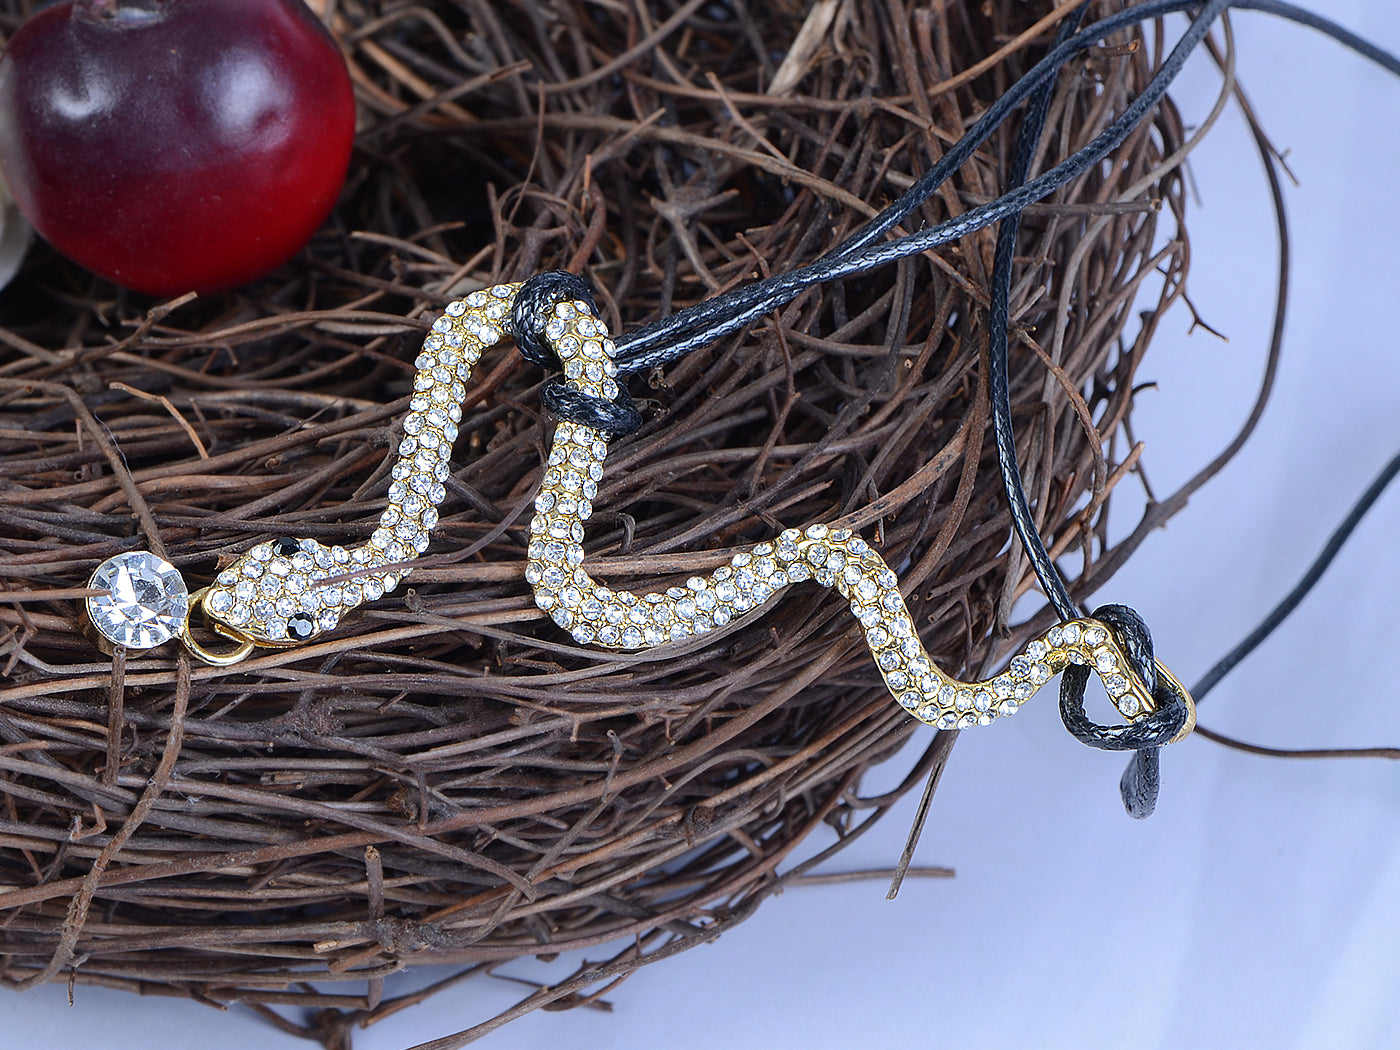 Squiggly Hanging Snake Reptile Pendant Necklace